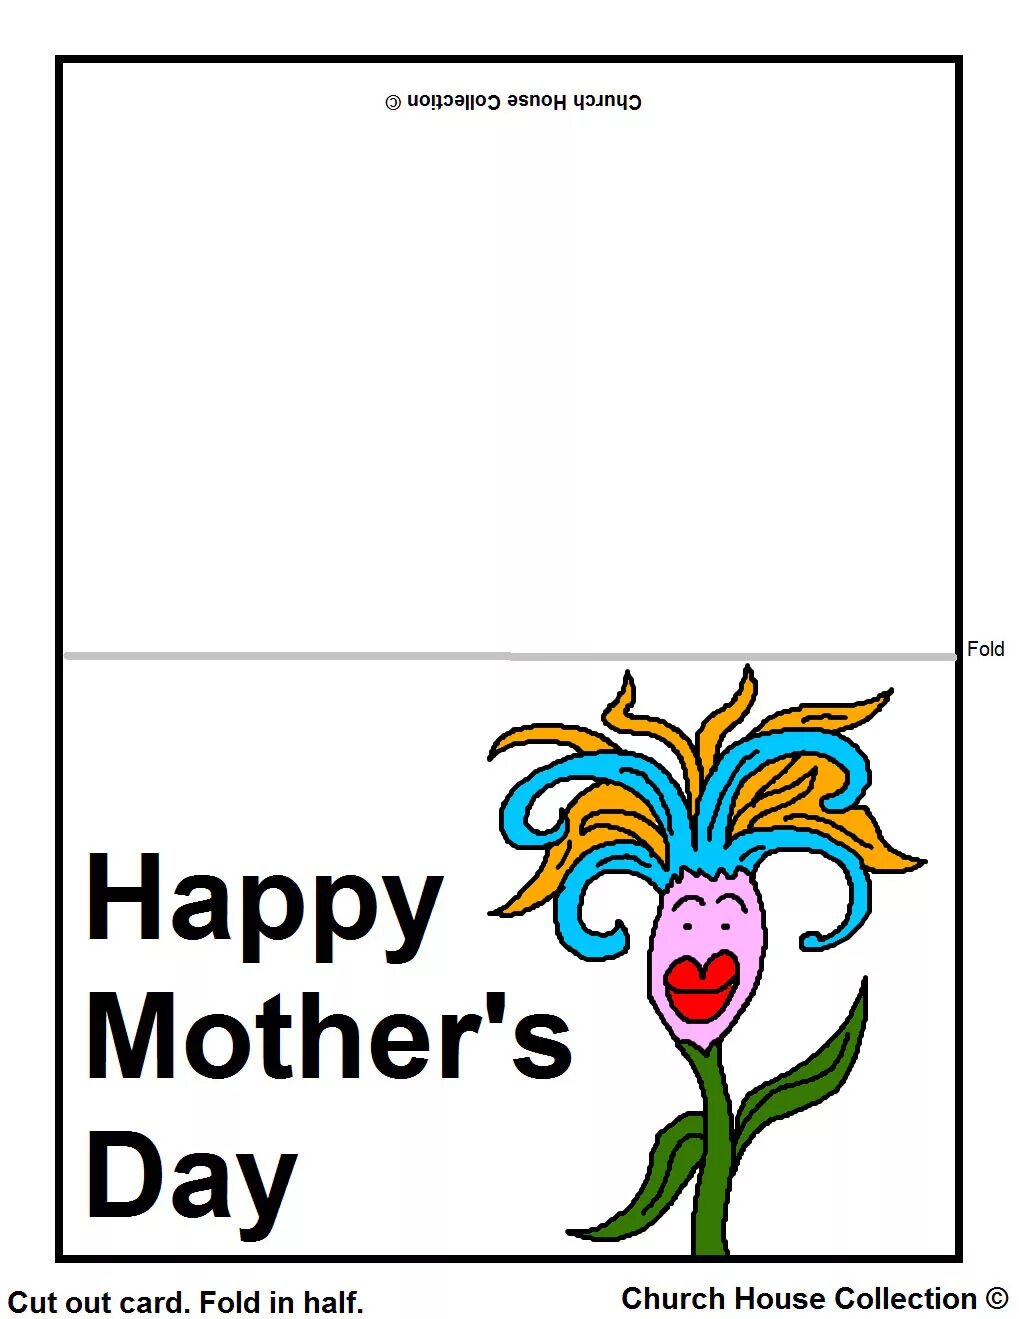 Printable cards. Mothers Day Crafts for Kids шаблон. Women`s Day Cards for Kids. Happy mother's Day Card for Kids. Mother's Day Card for Kids Printables.